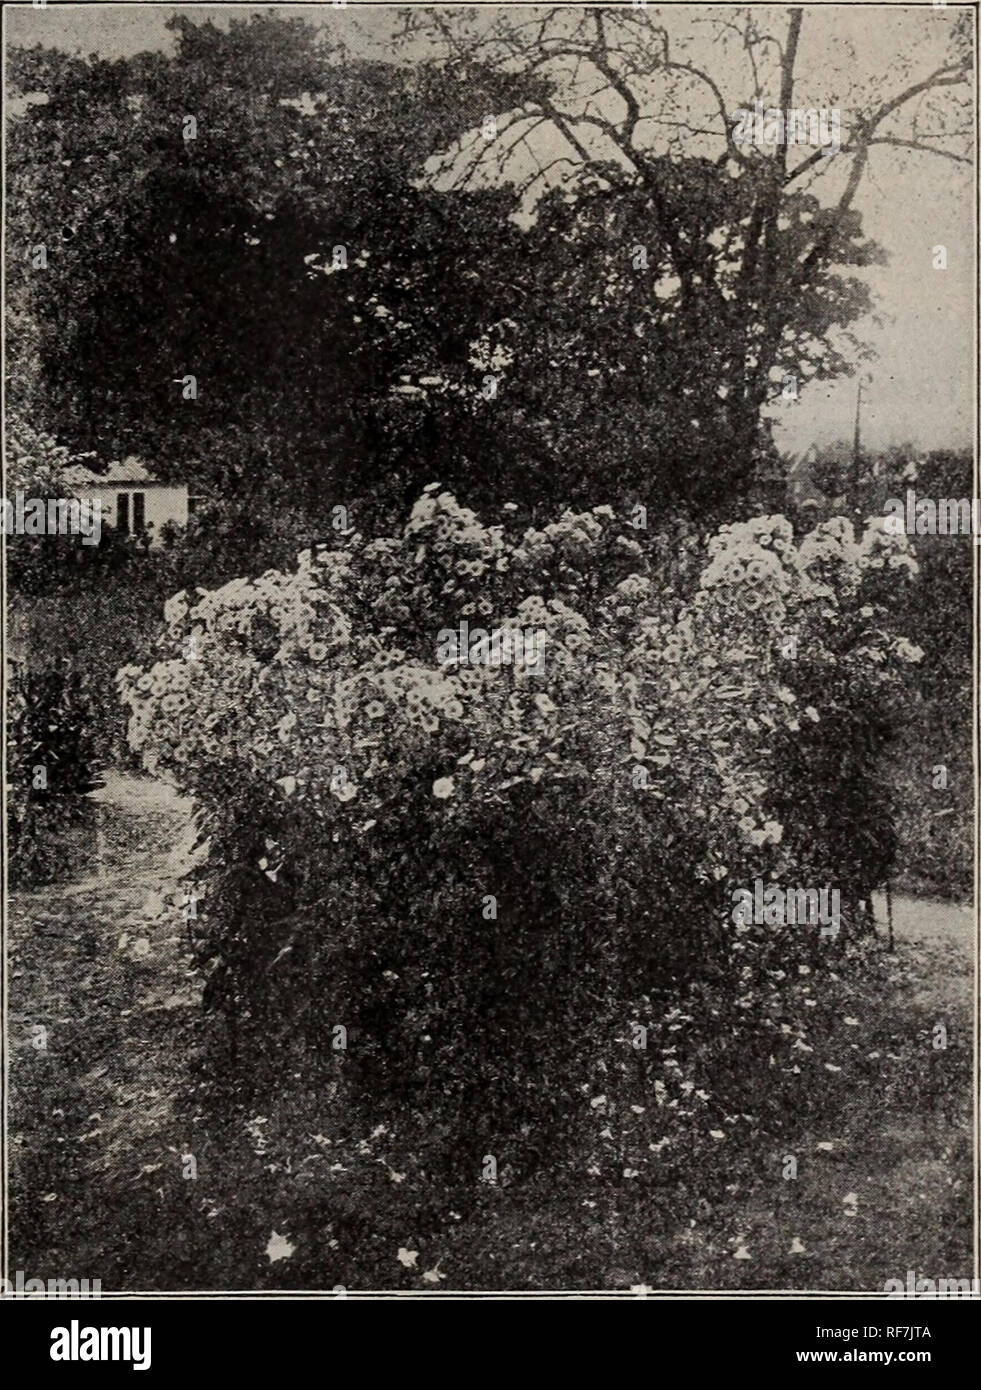 . Descriptive catalogue : trees, shrubs and plants. Nursery stock, New York (State), New York, Catalogs; Trees, Seedlings, Catalogs; Shrubs, Catalogs; Flowers, Catalogs; Fruit, Catalogs. FLUSHING, NEW YORK 43 PEONIES, continued alone recommend it, but when, in ad- dition, you consider its most attractive foliage, and more especially its im- mense double flowers in almost all shades of color, and generally their de- lightful perfume, you have a record of valuable points that no other flower can equal. You do not have to coddle them as you do the rose and many other plants, but if placed in good Stock Photo